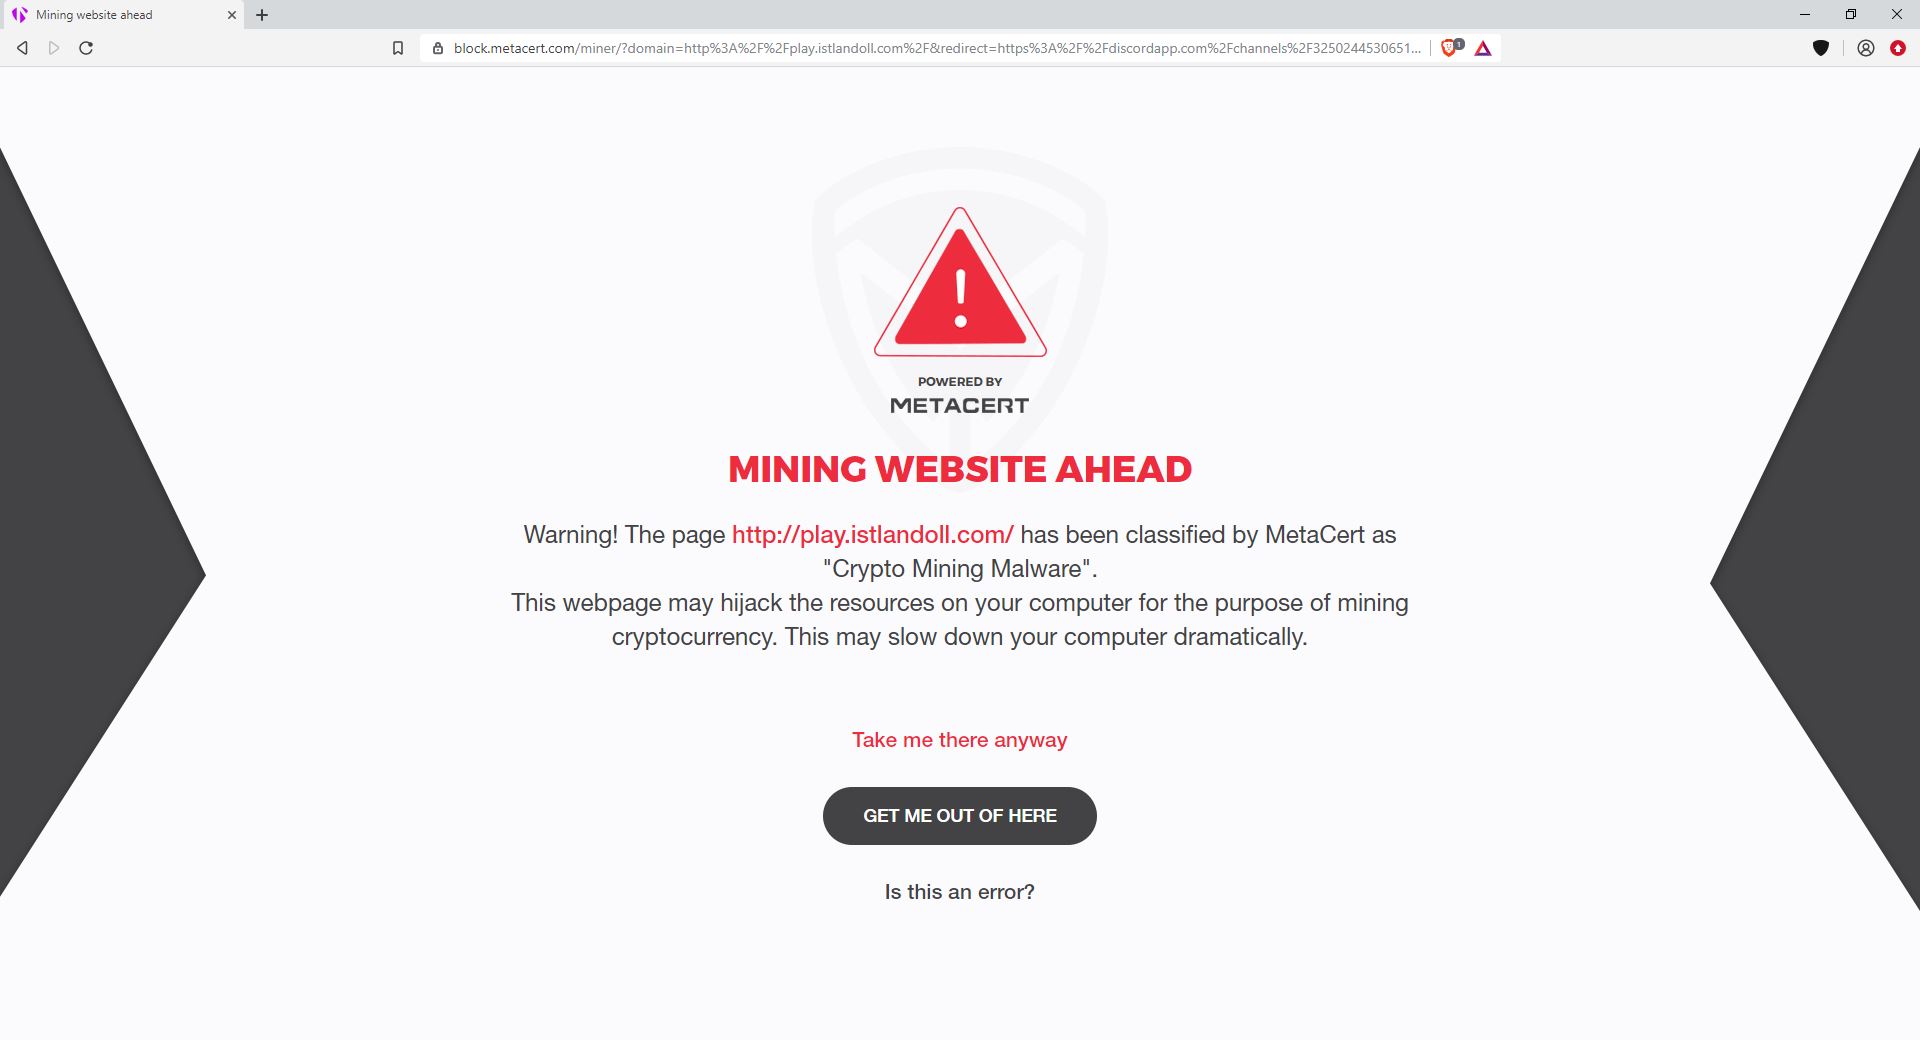 Image of the mining website post